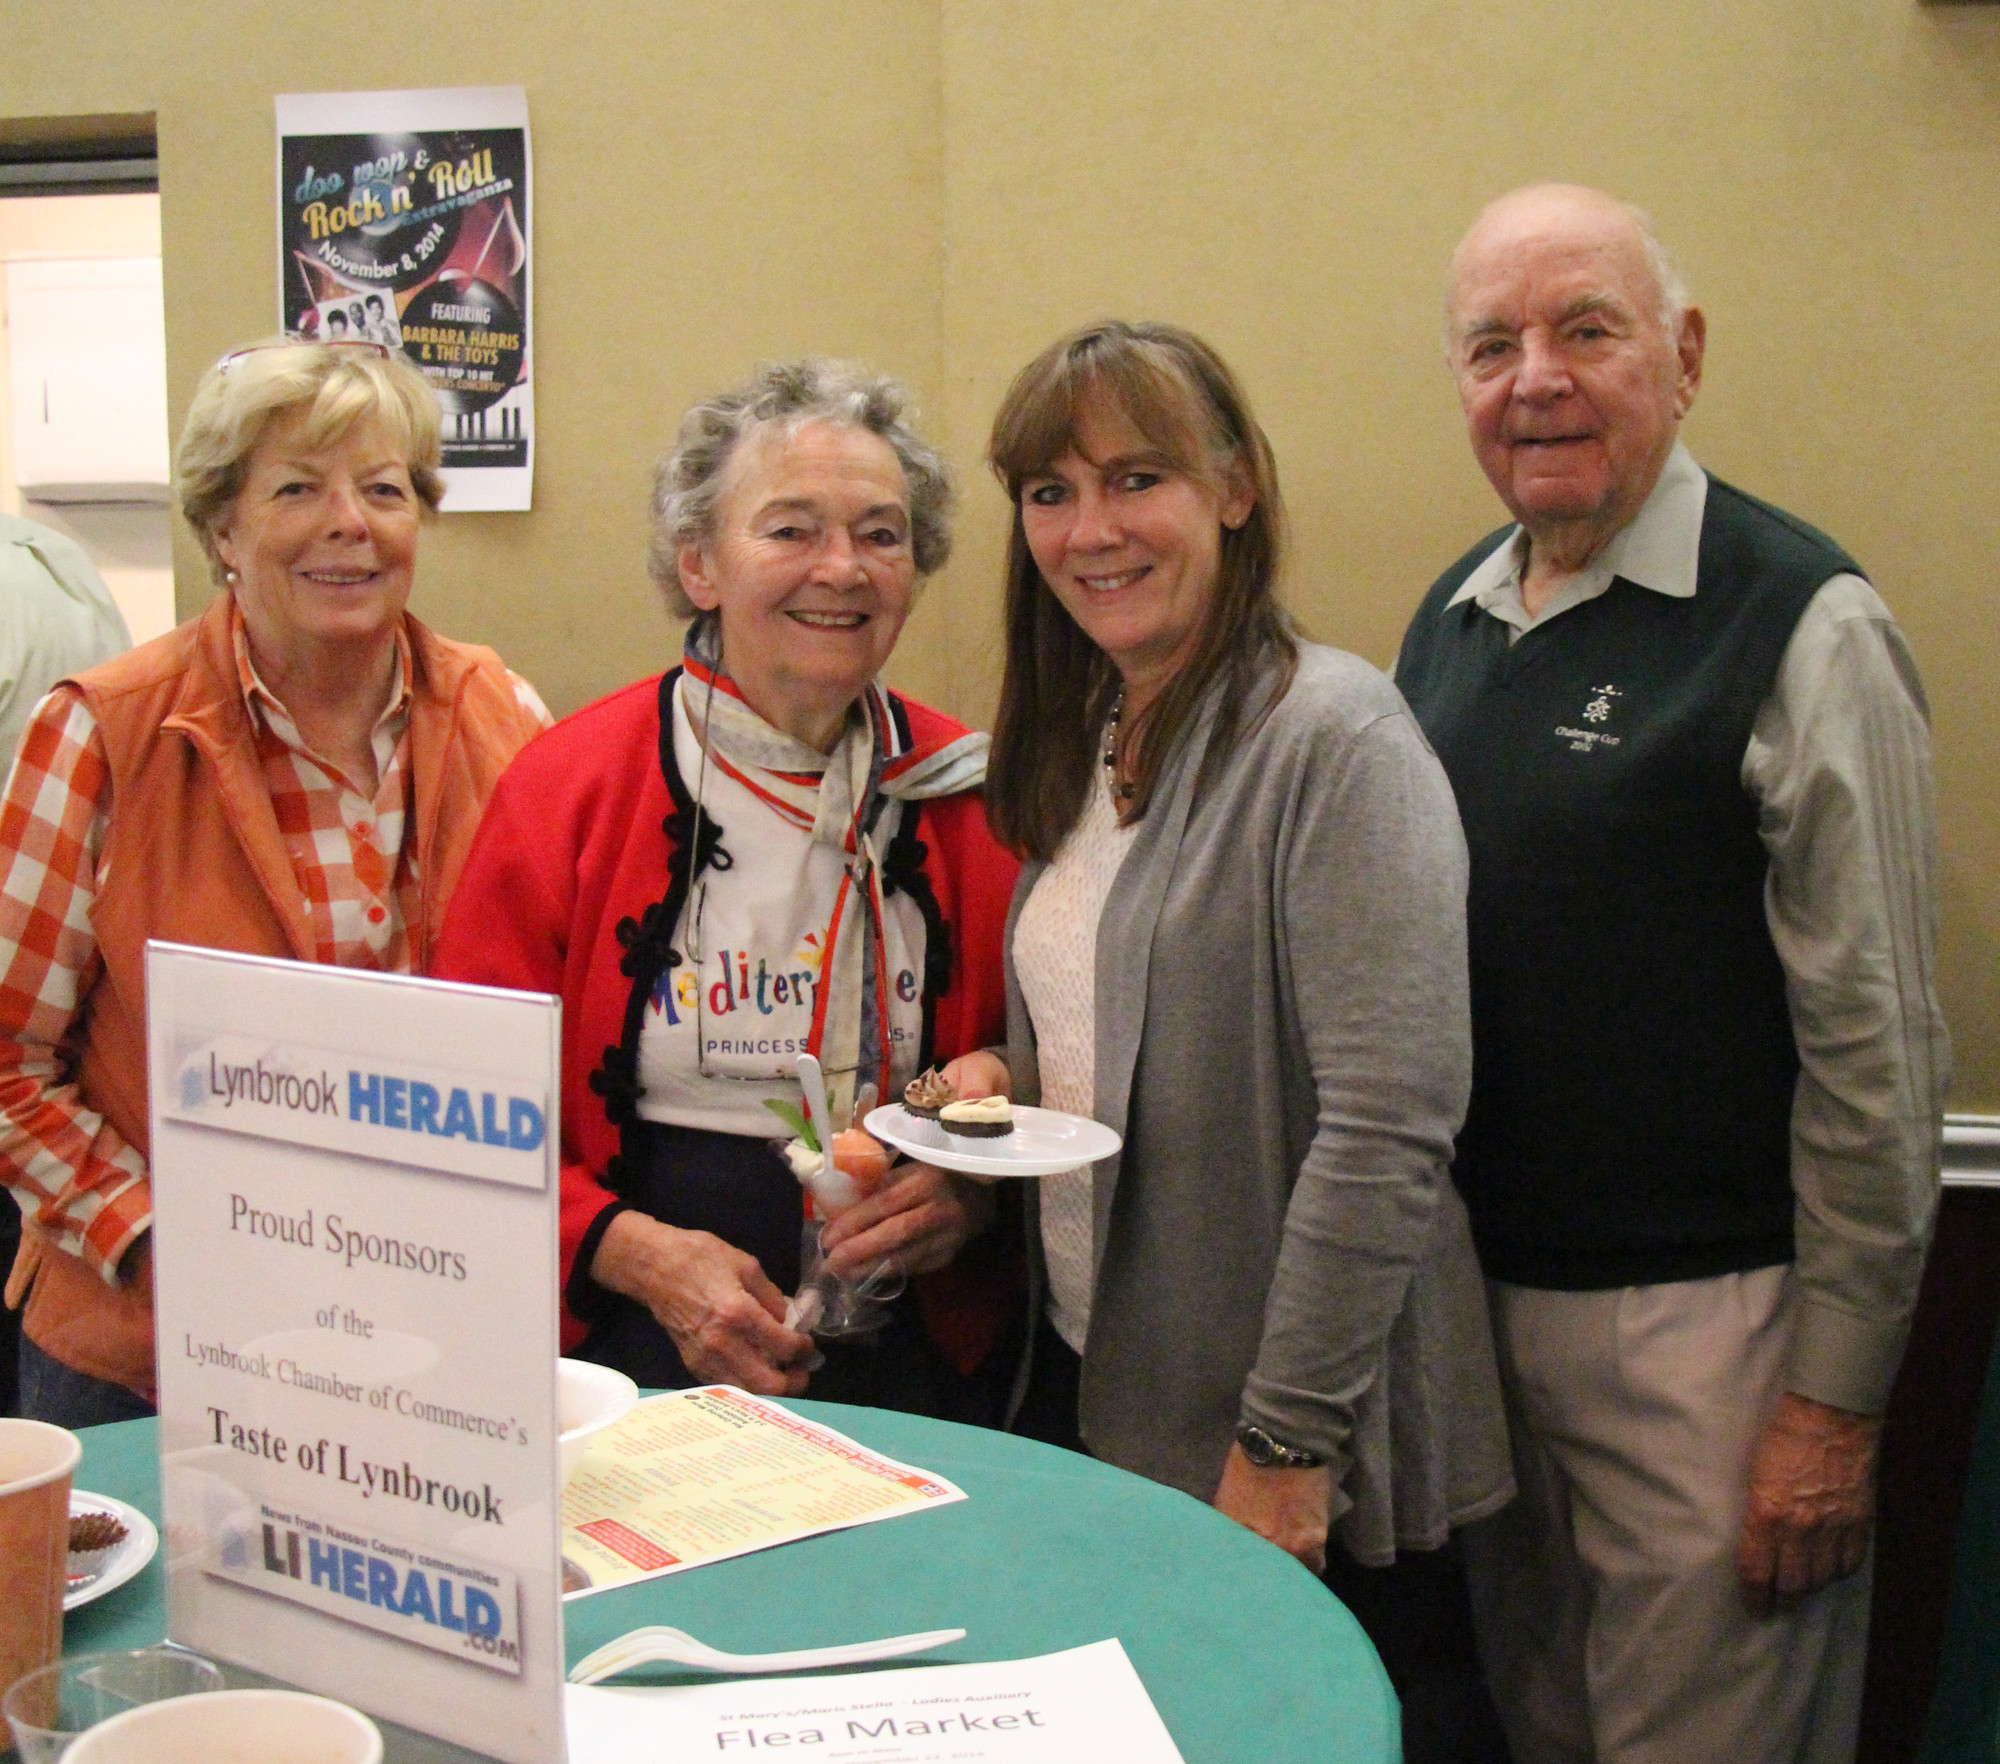 Marge Essner, Sheila Stone, Marjorie Monahan and Warren Essner enjoyed the delicious samples.